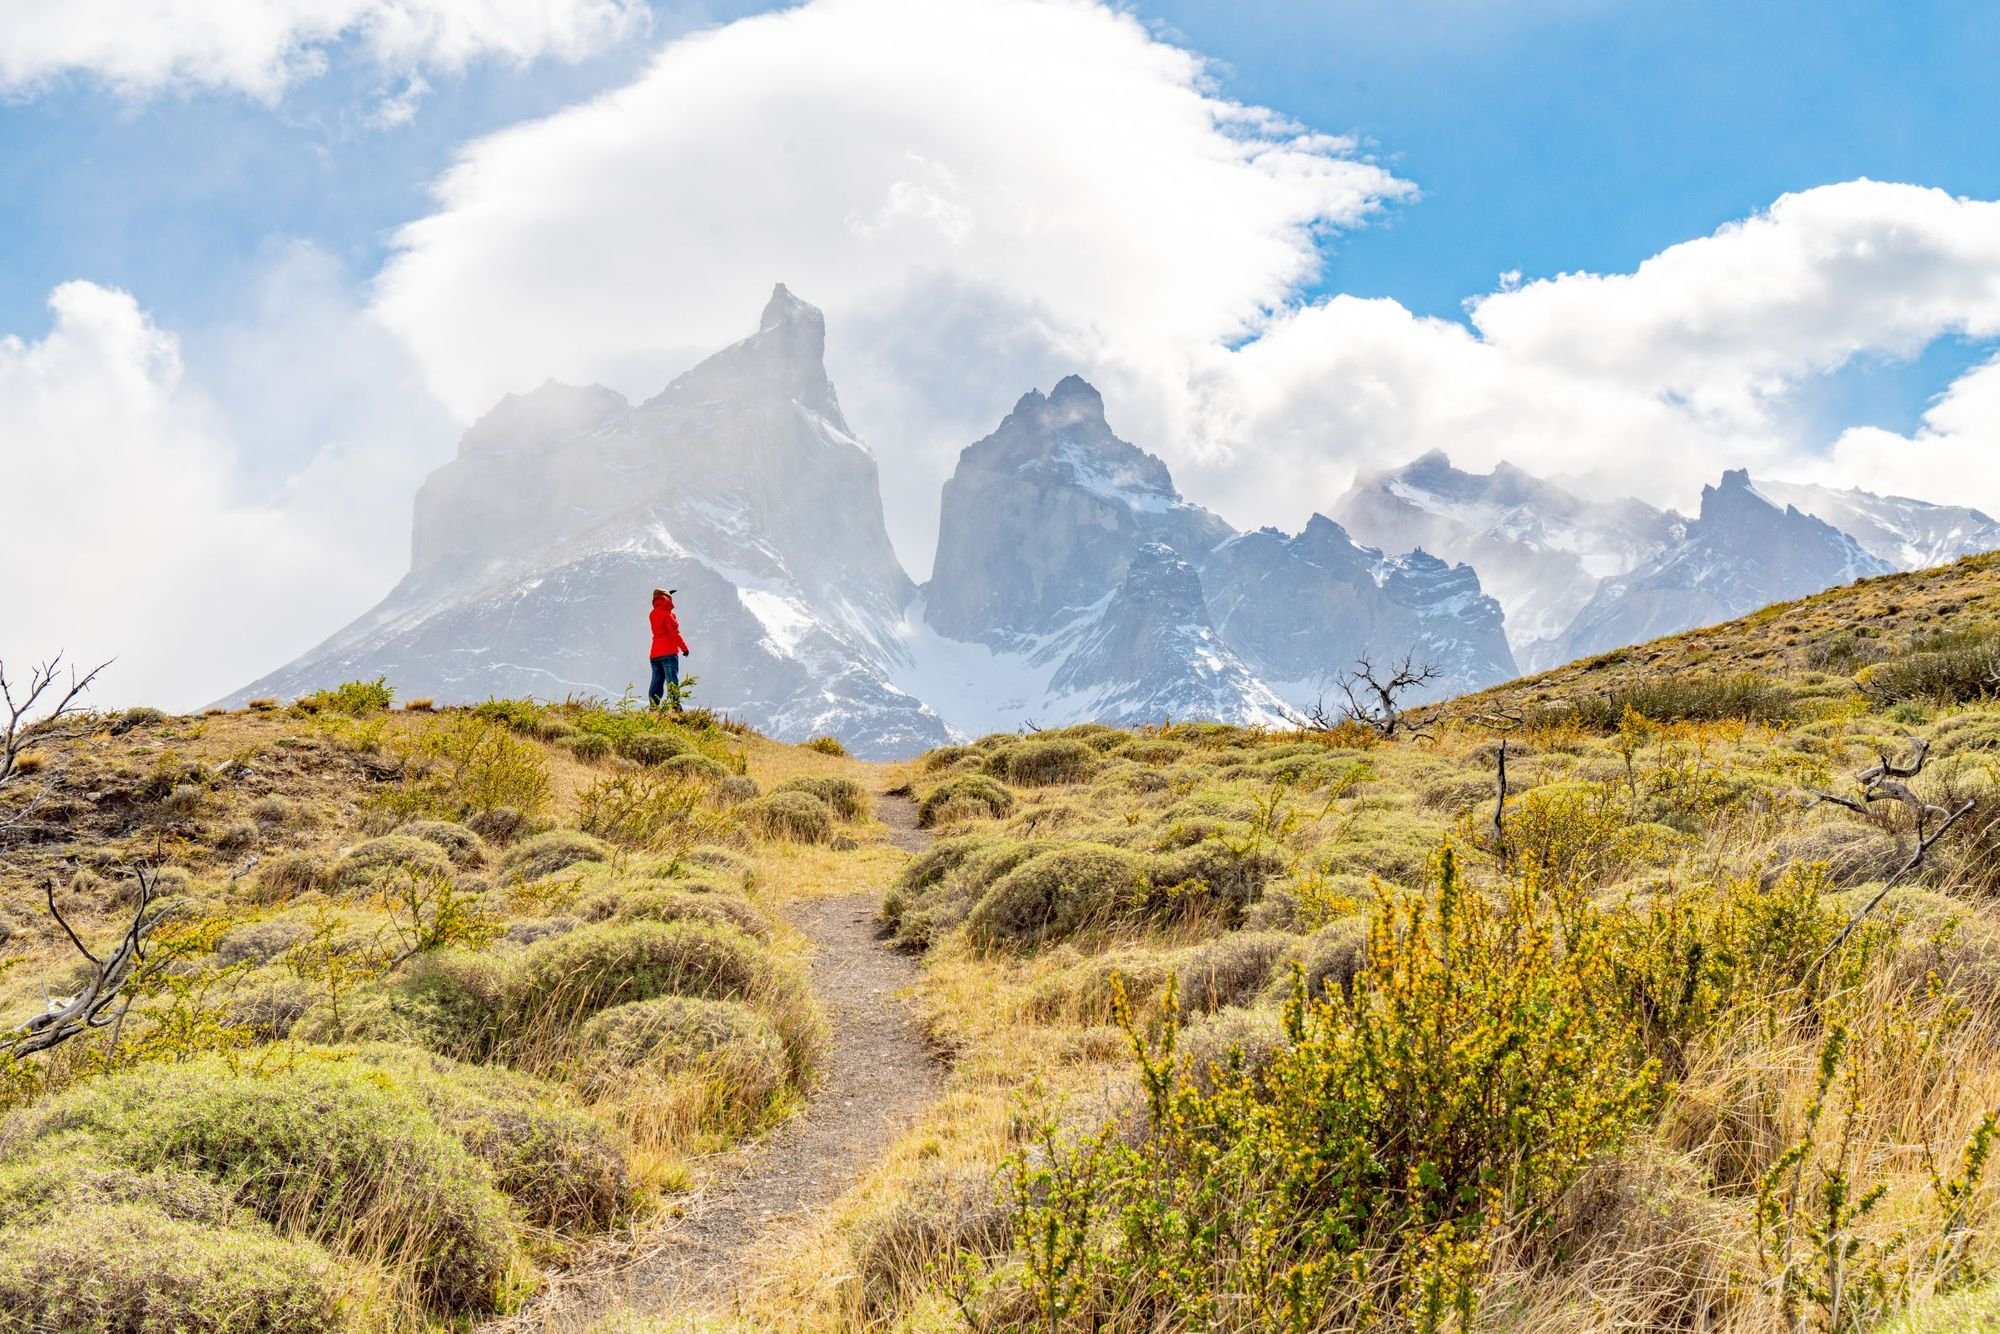 The distinctive, sharp crags of Torres del Paine piercing the sky in Chilean Patagonia. Photo: Getty